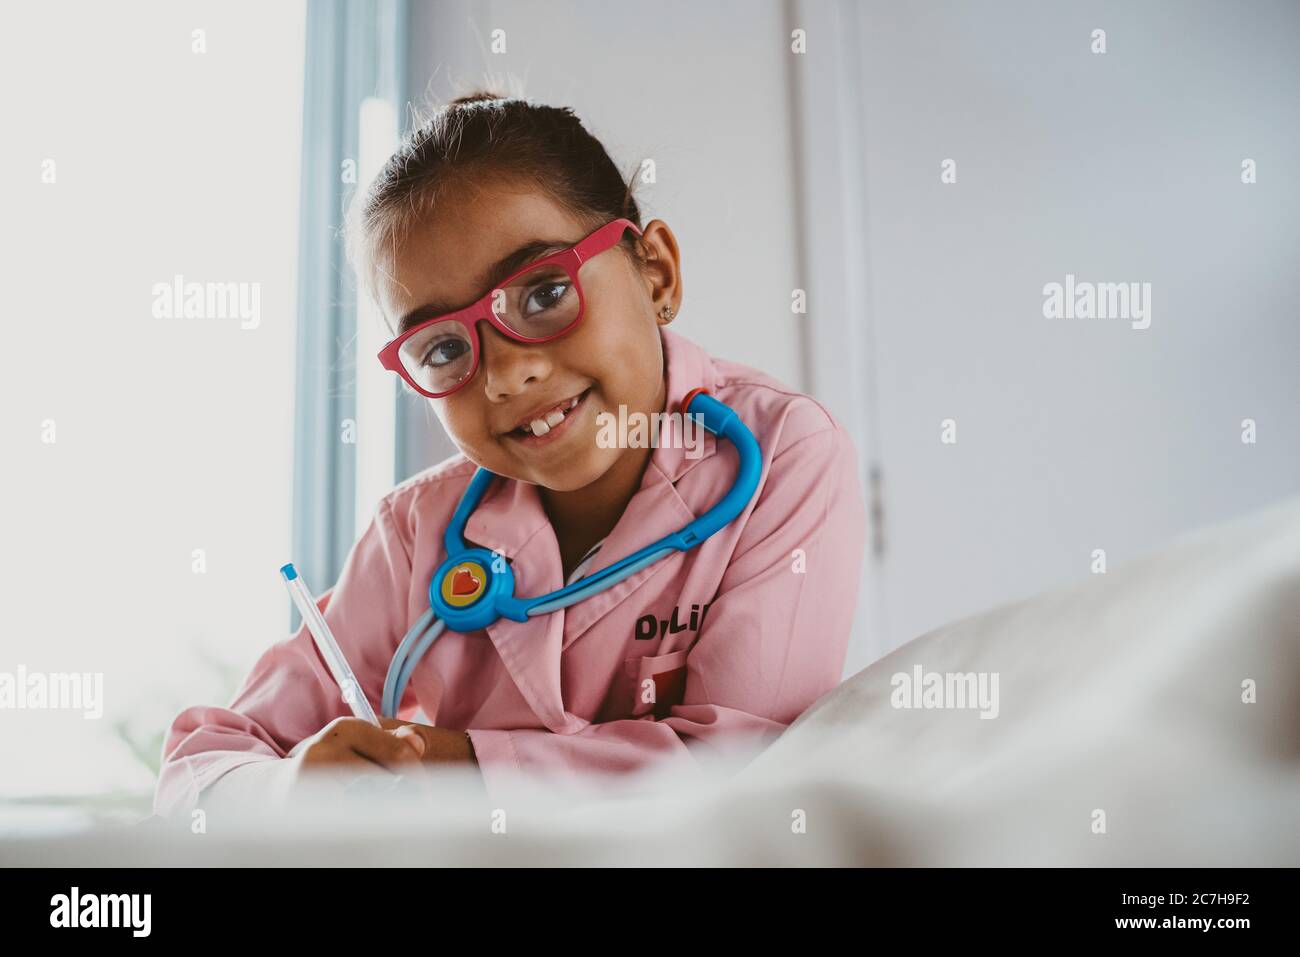 Multi racial girl dressed up as a doctor looking at camera Stock Photo